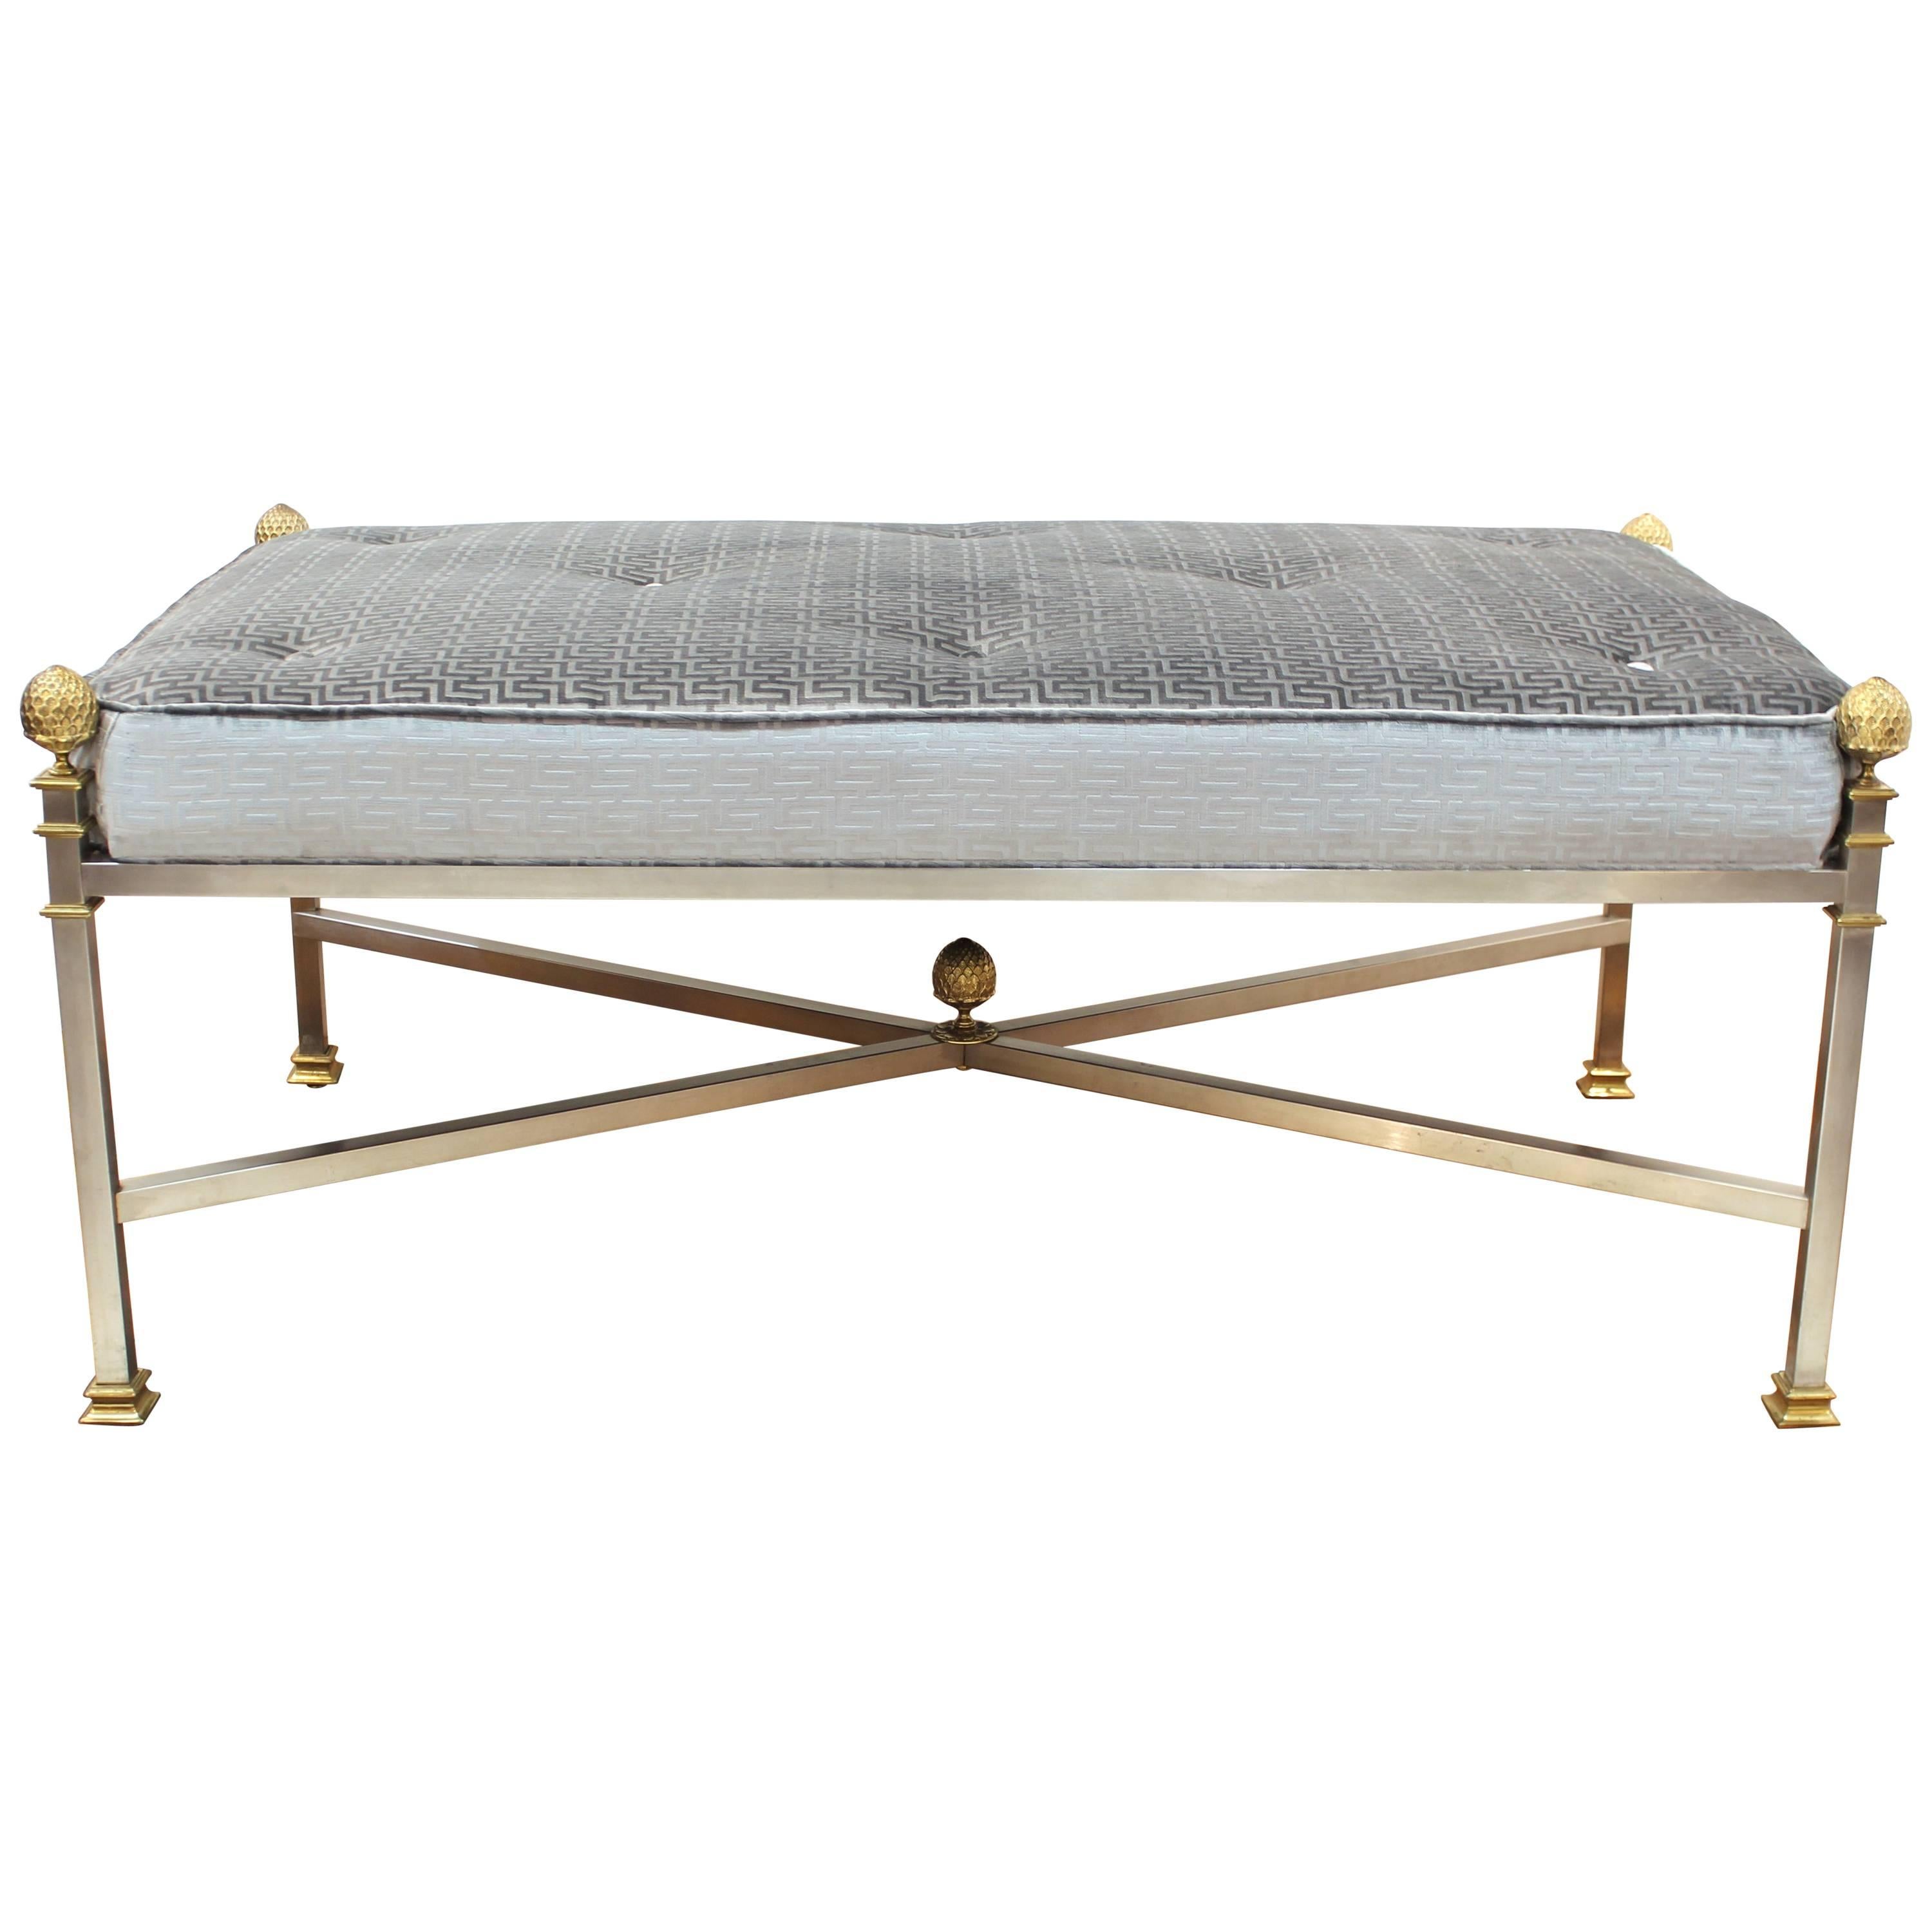 French Maison Jansen Large Bench in Brushed Steel and Greek Key Textile